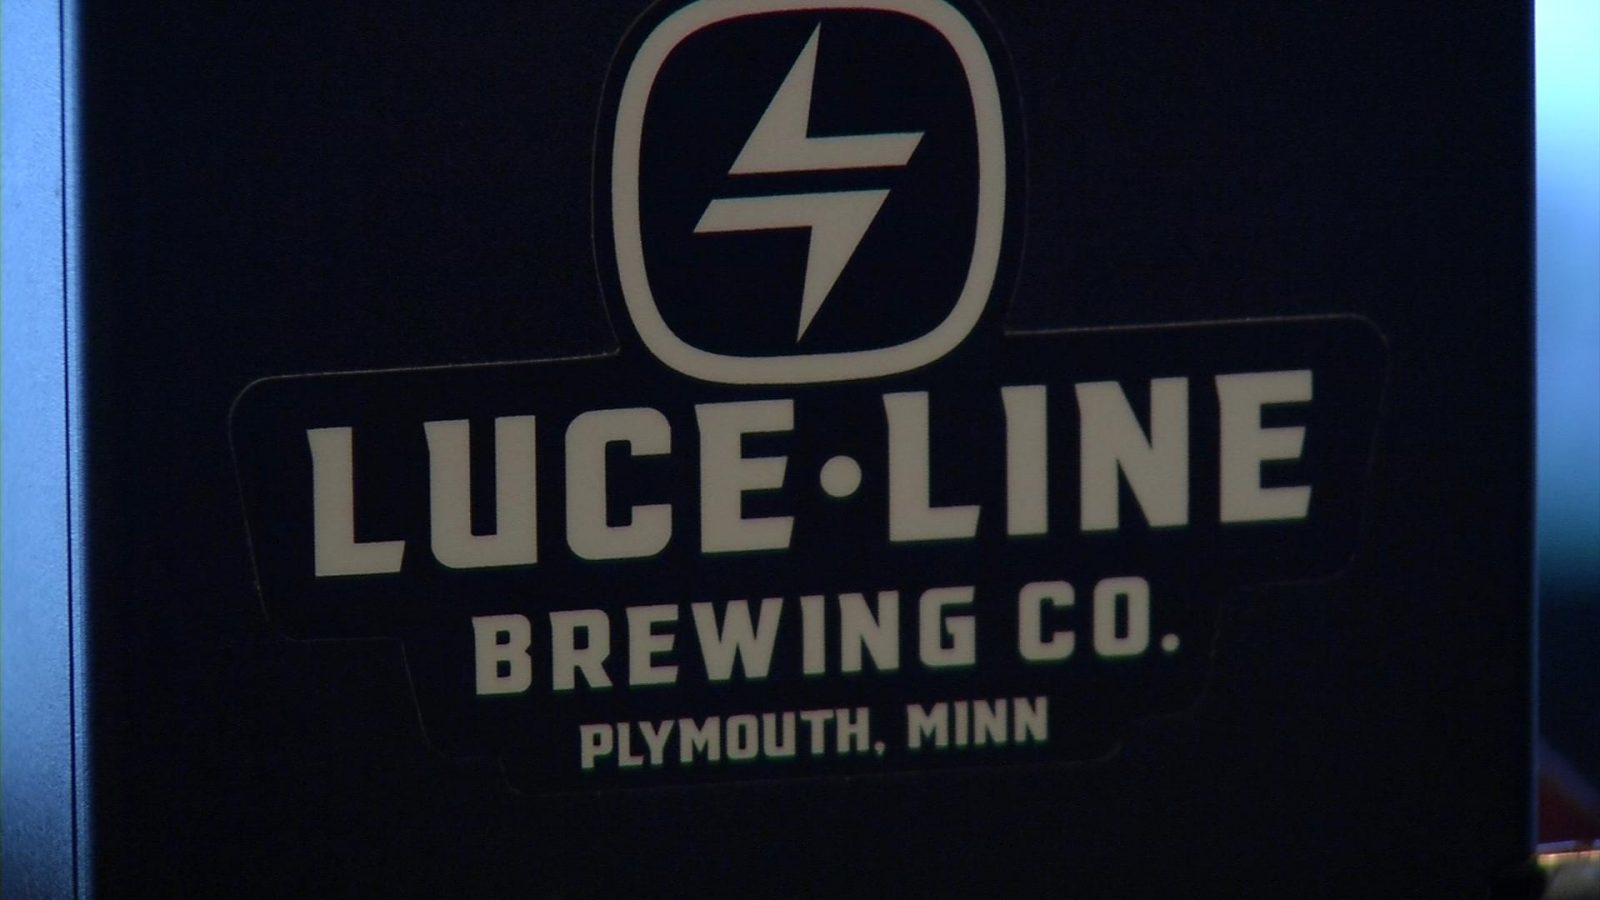 Luce Line brewing